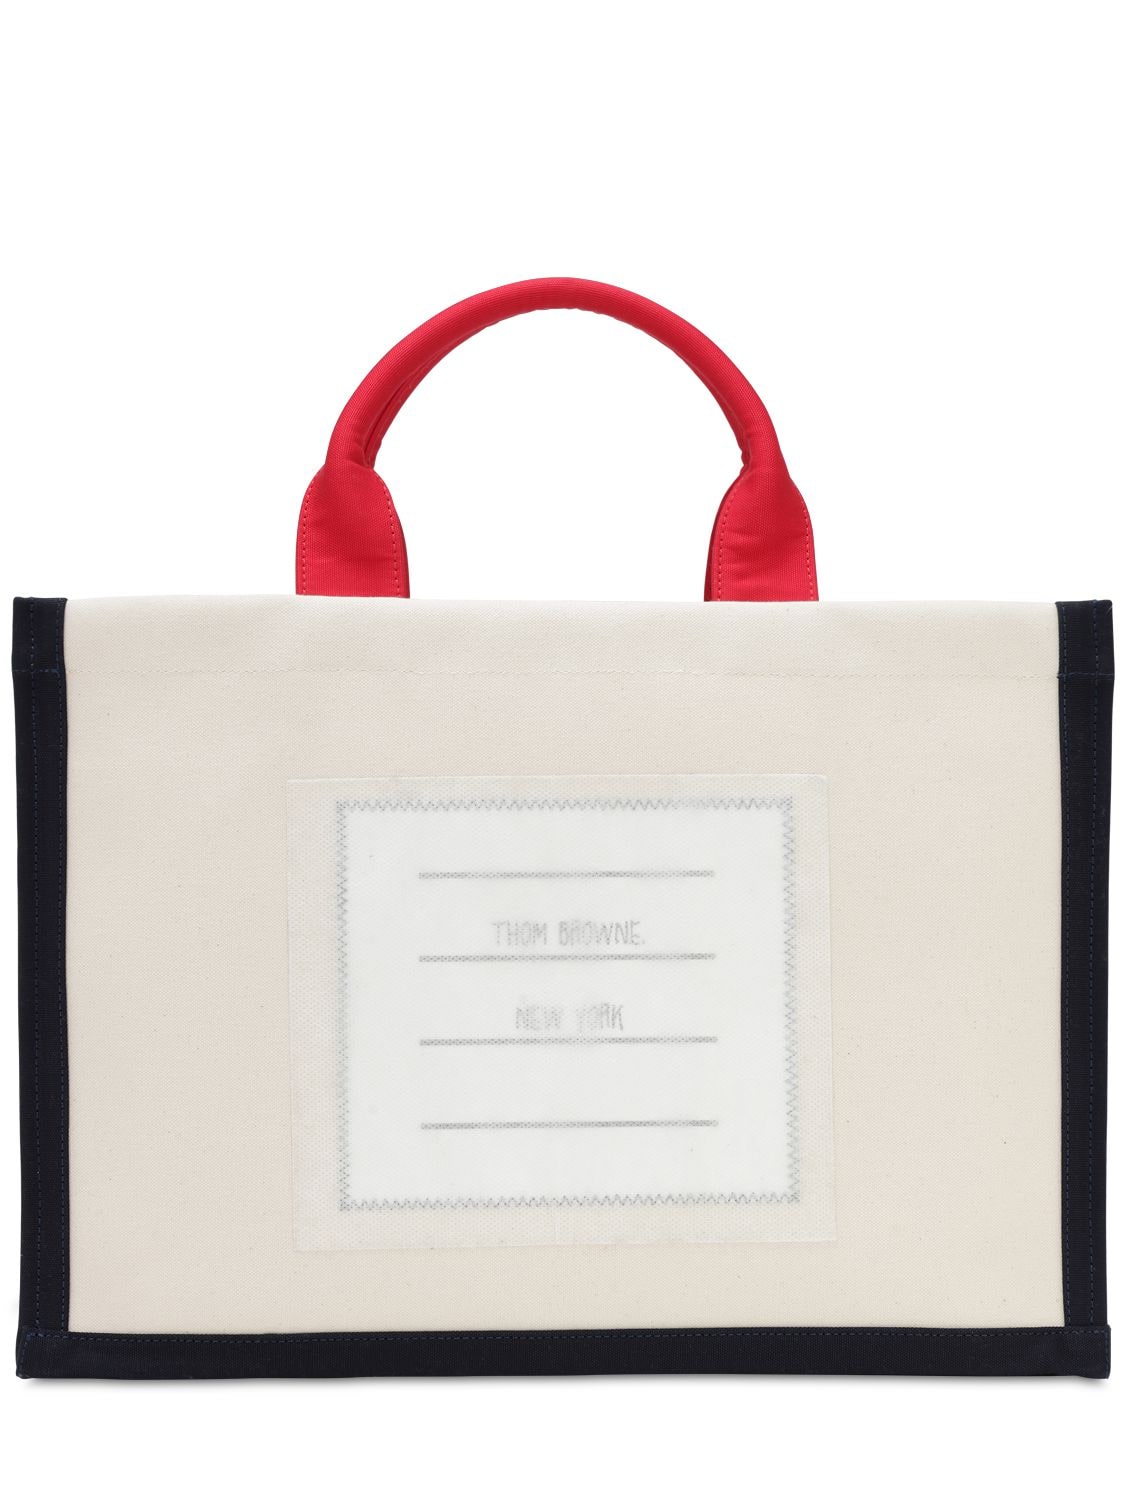 Thom Browne COTTON CANVAS TOTE BAG W/ PATCH